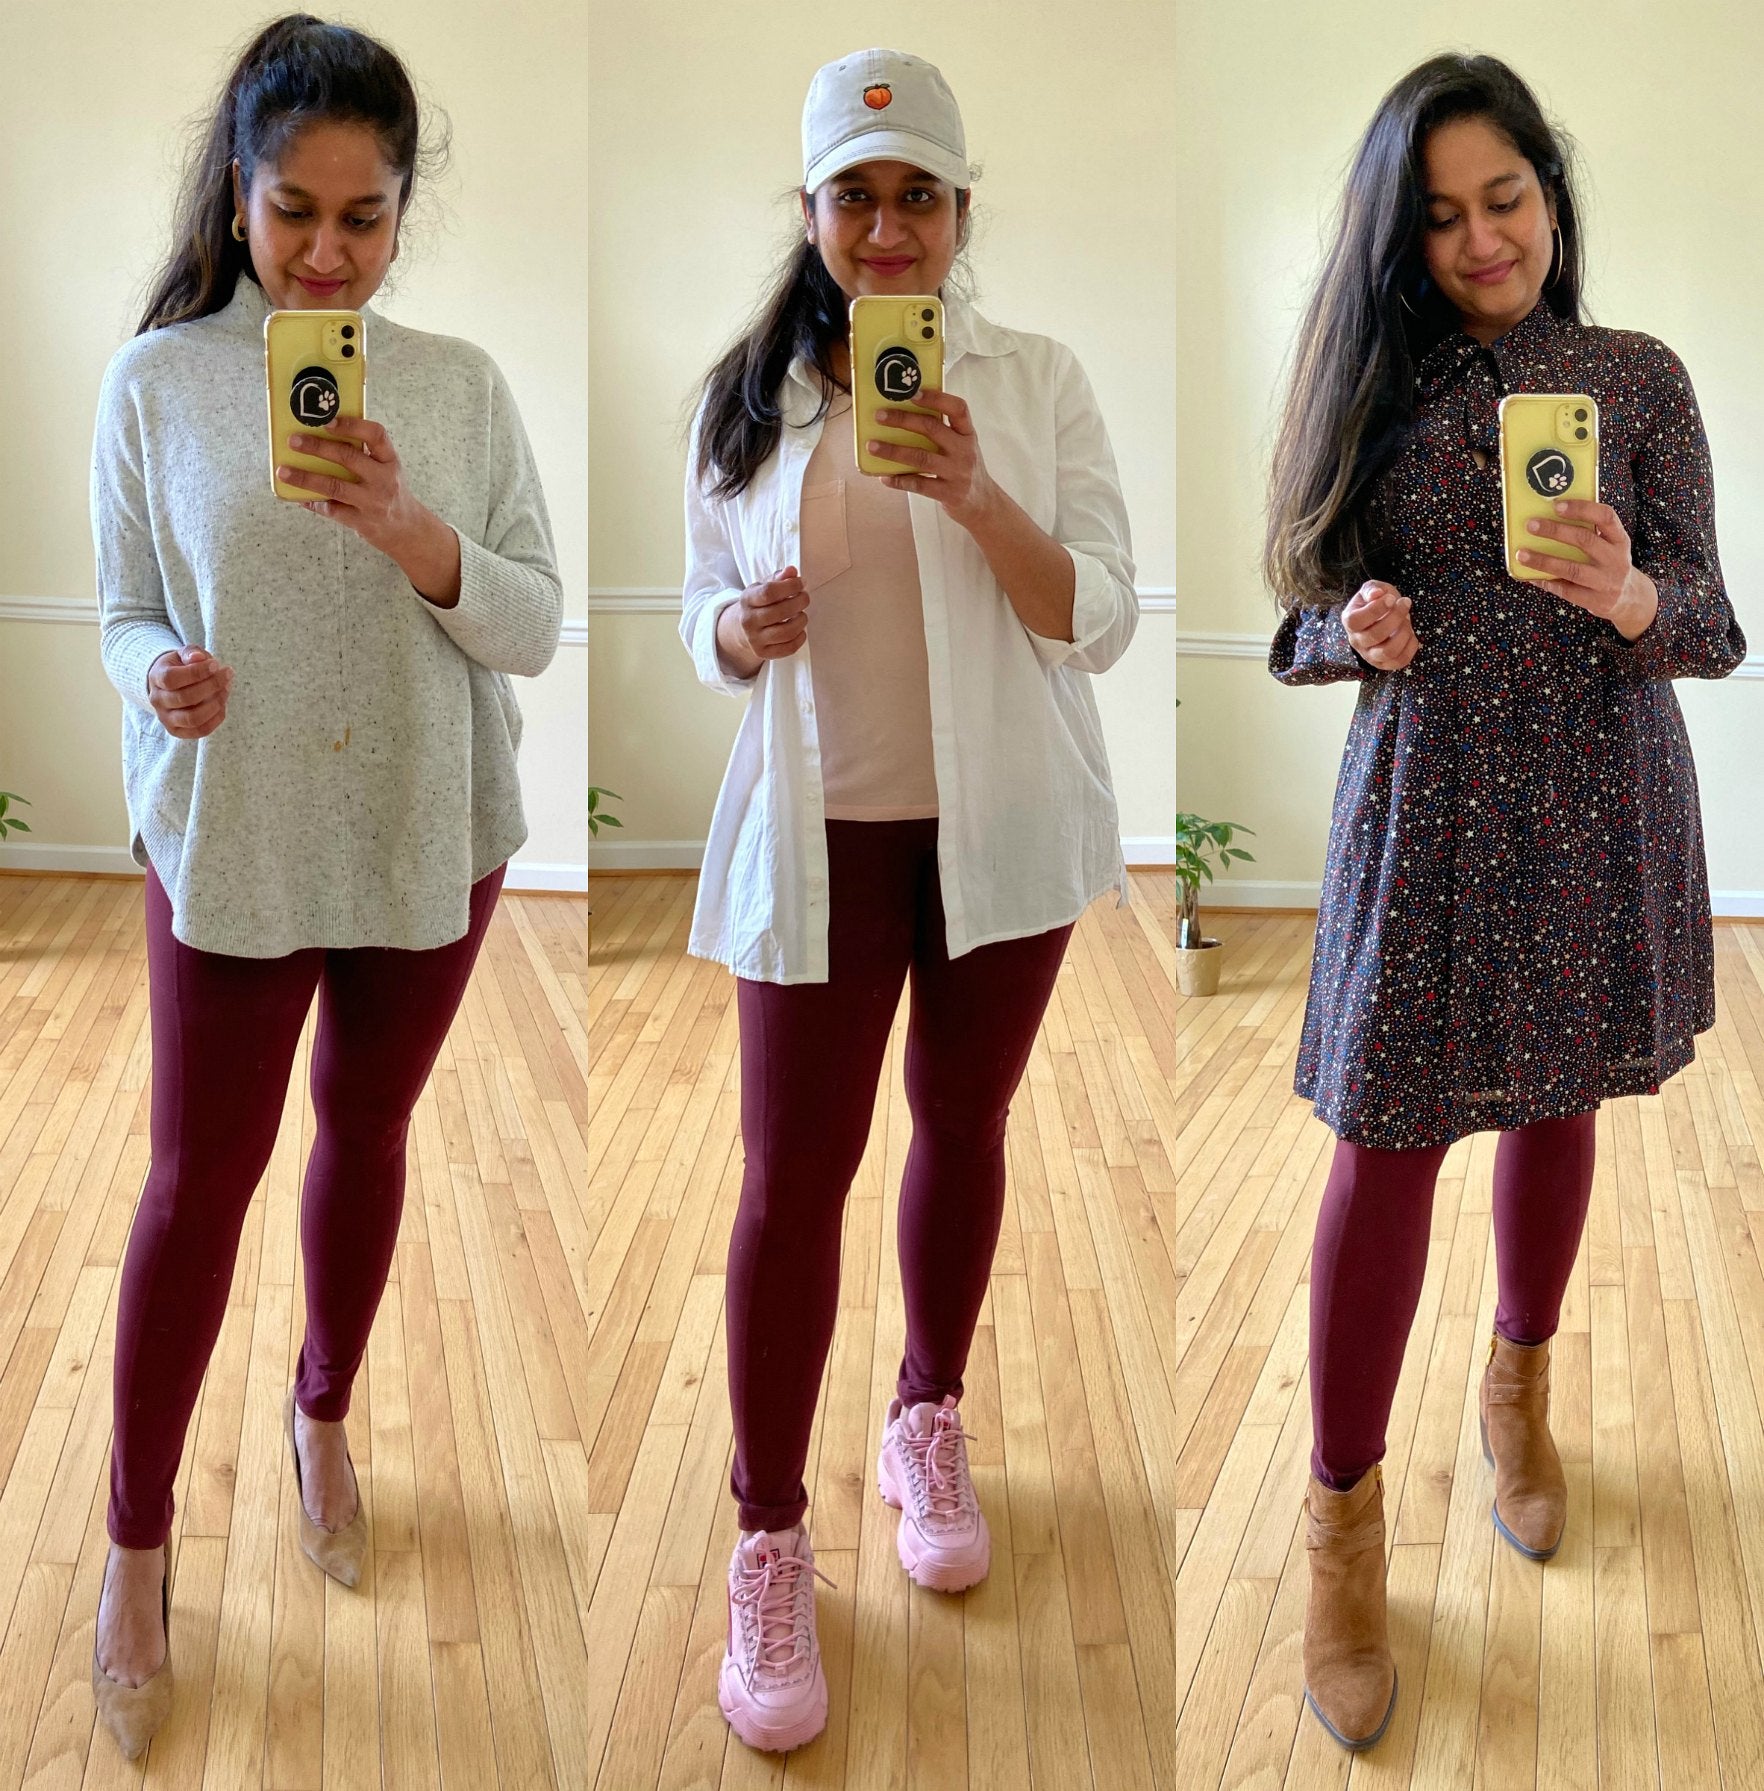 What To Wear With Burgundy Leggings? – solowomen